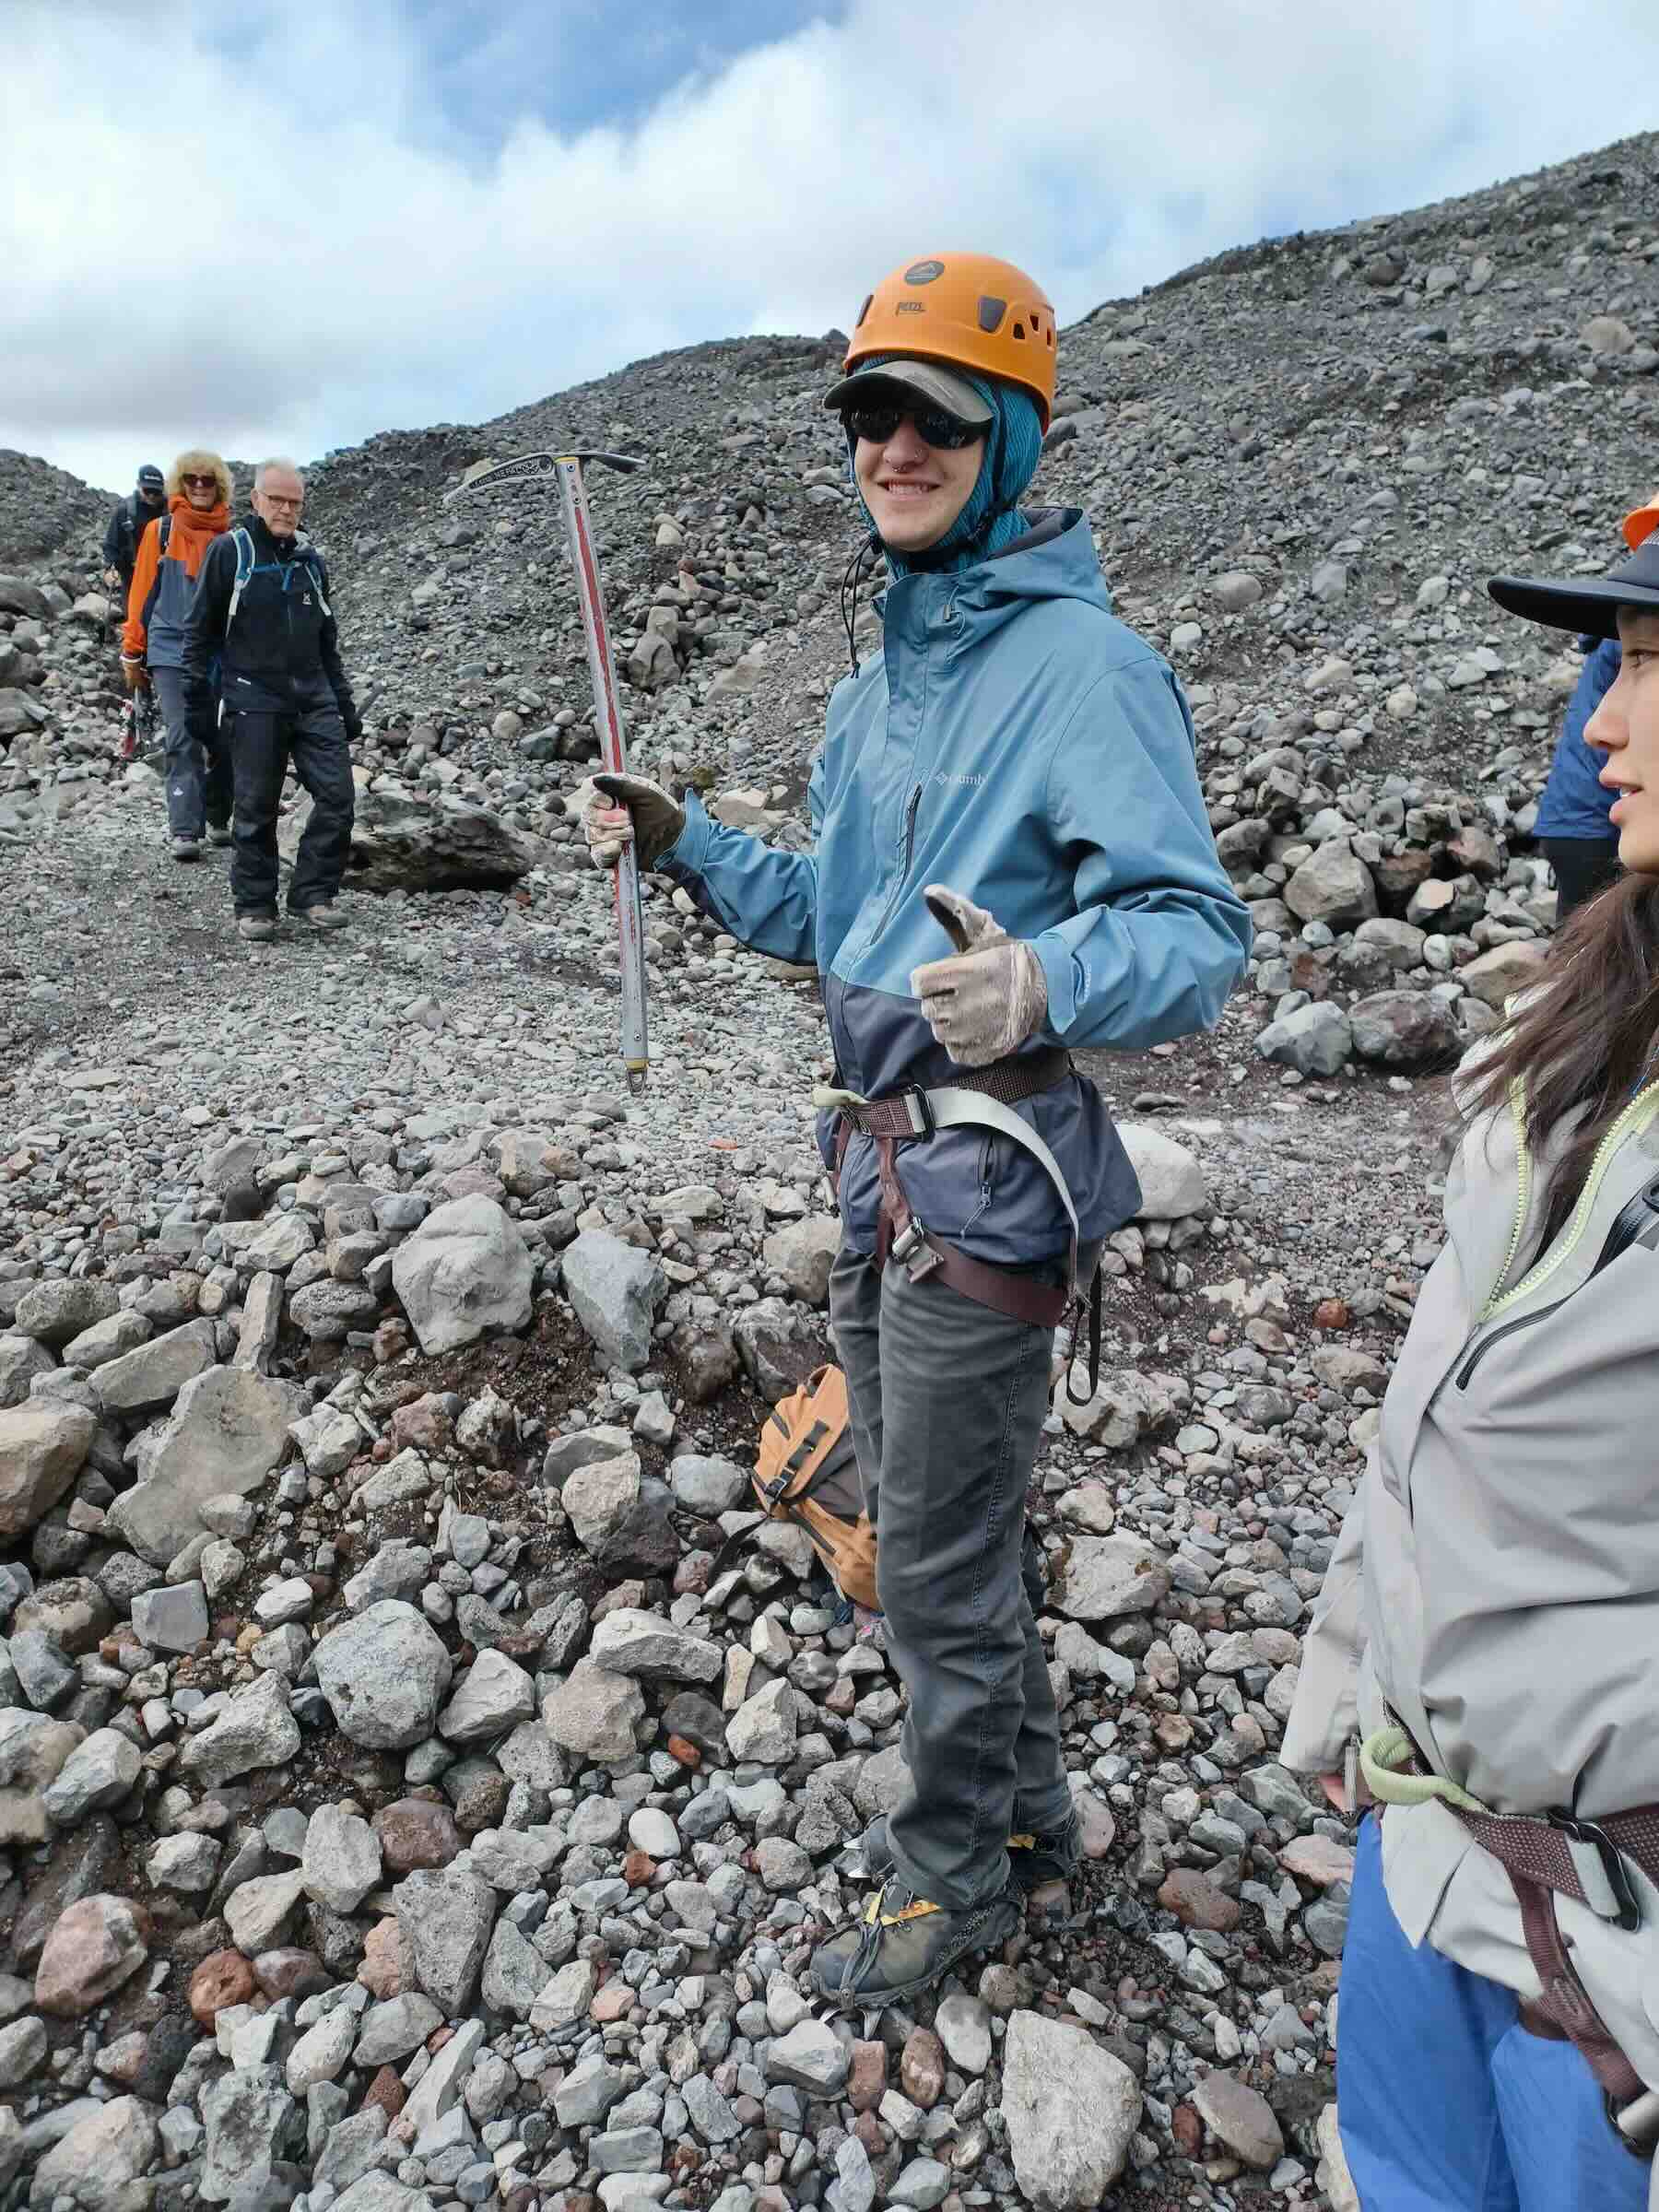 A smiling person in climbing gear holding a pick axe giving a thumbs up.